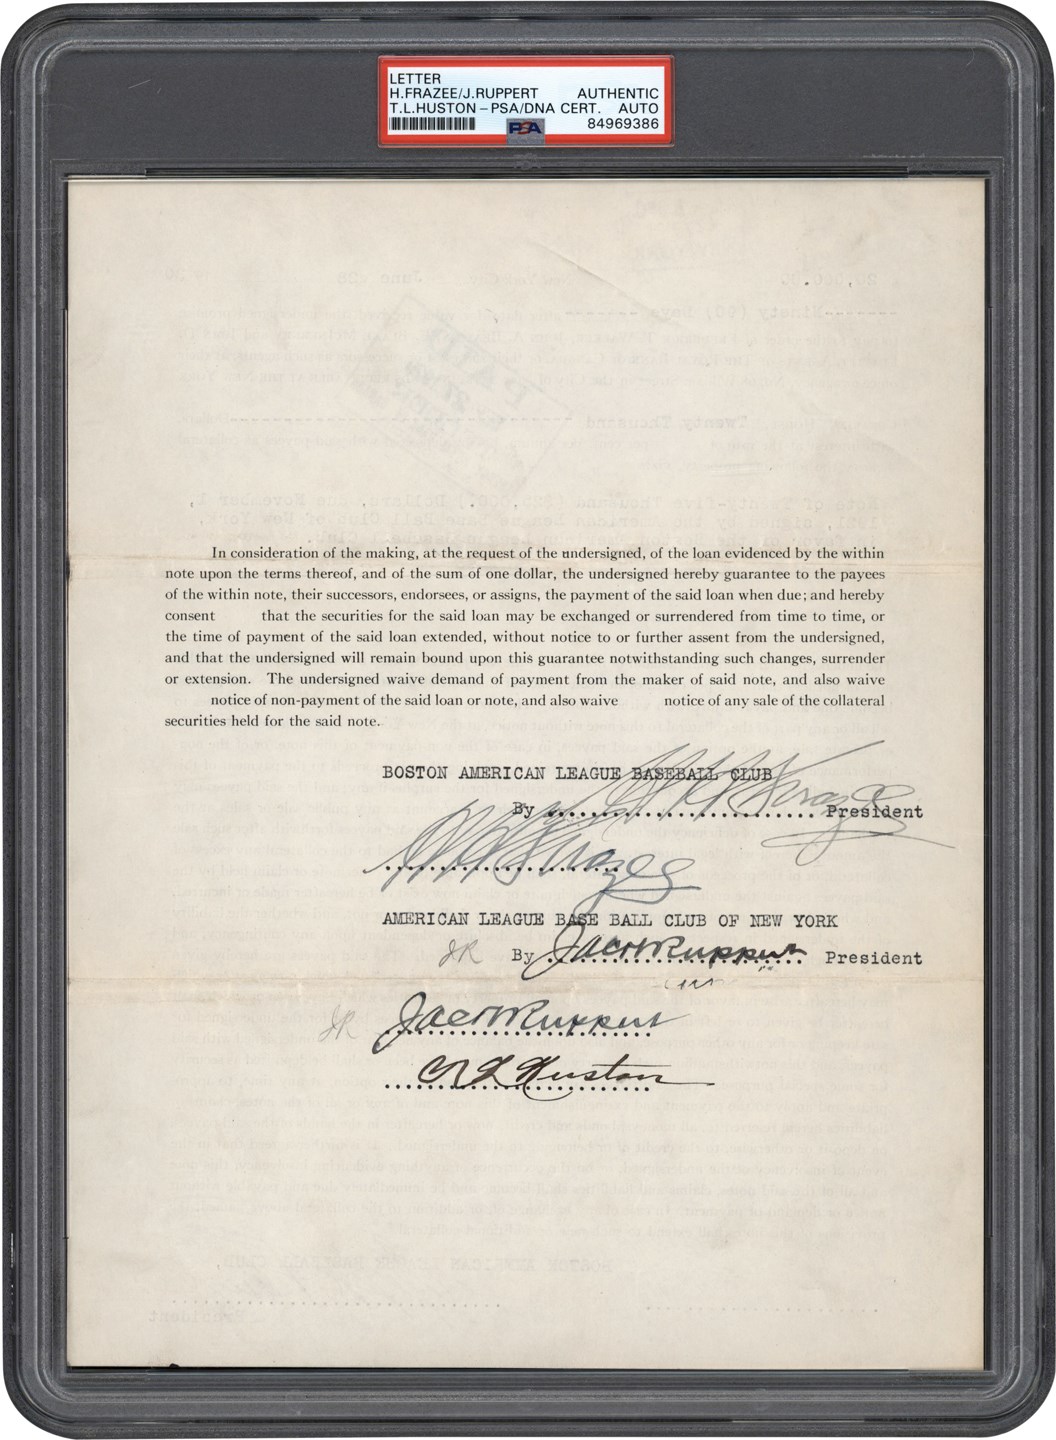 The Babe Ruth Sale Archive - 1920 Harry Frazee Promissory Note Directly Relating to the Sale of Babe Ruth with Related Correspondence (ex-Barry Halper Collection)